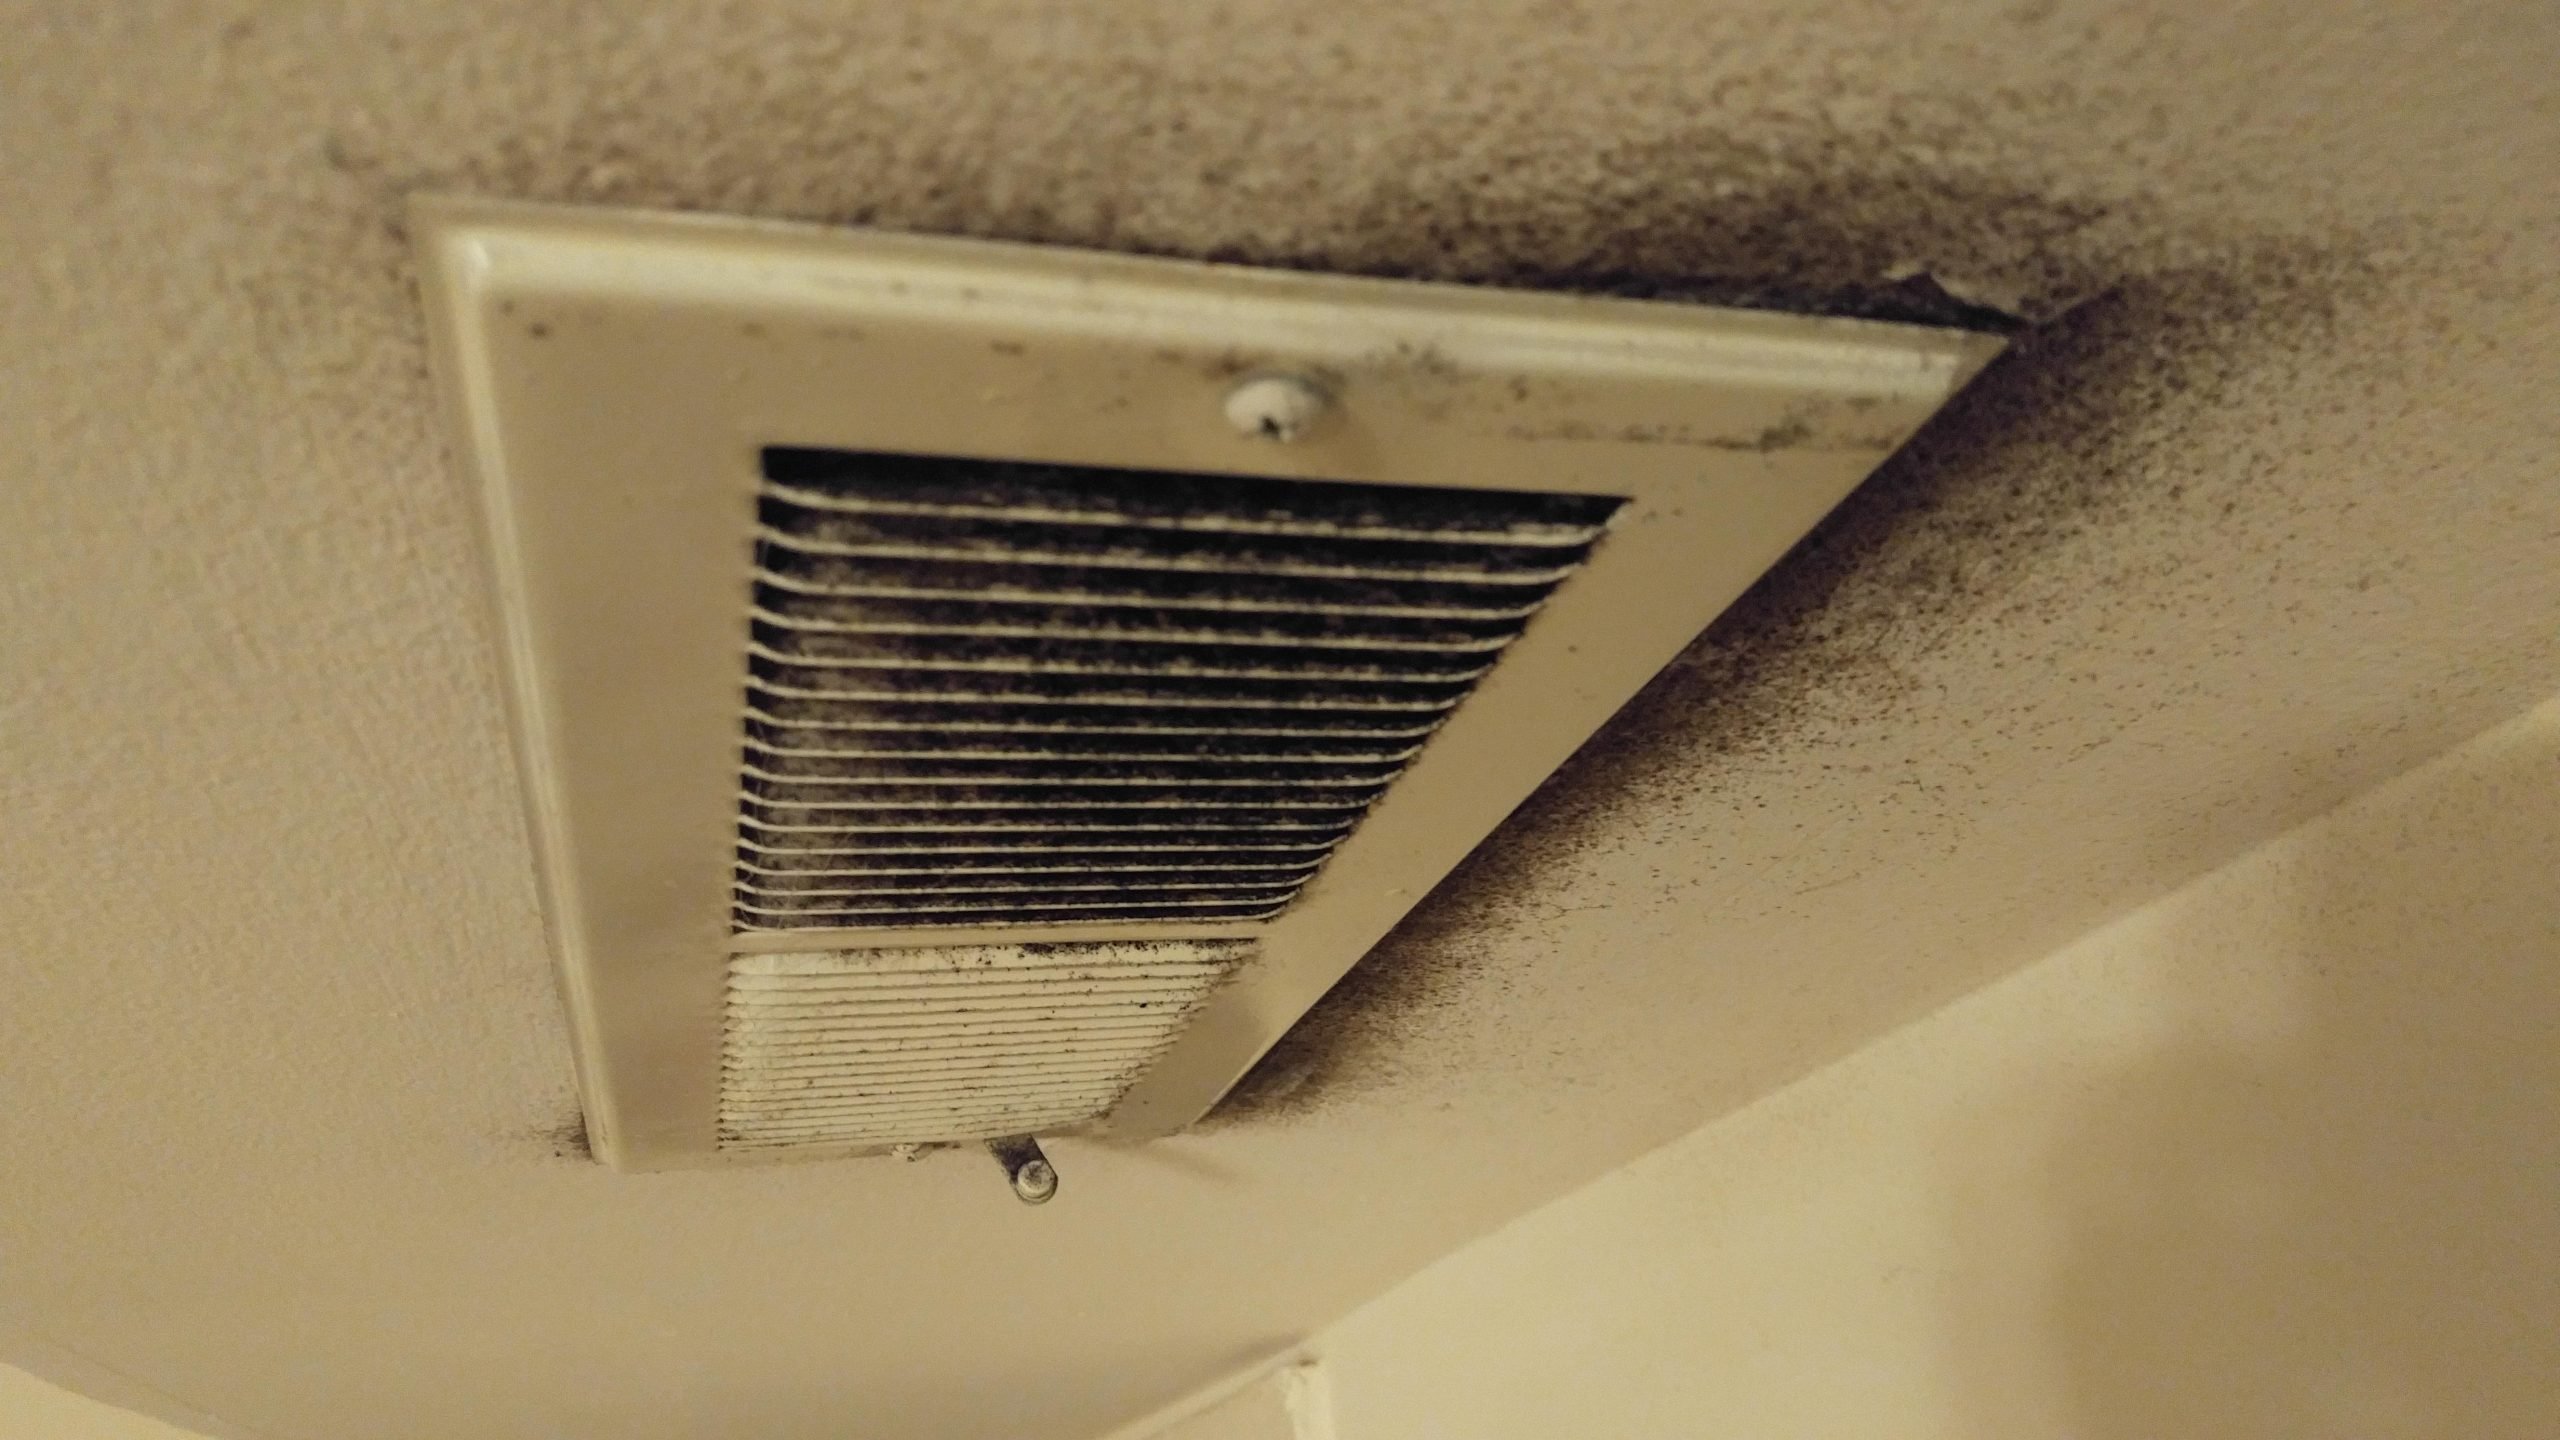 Black Mold On Ceiling Vents